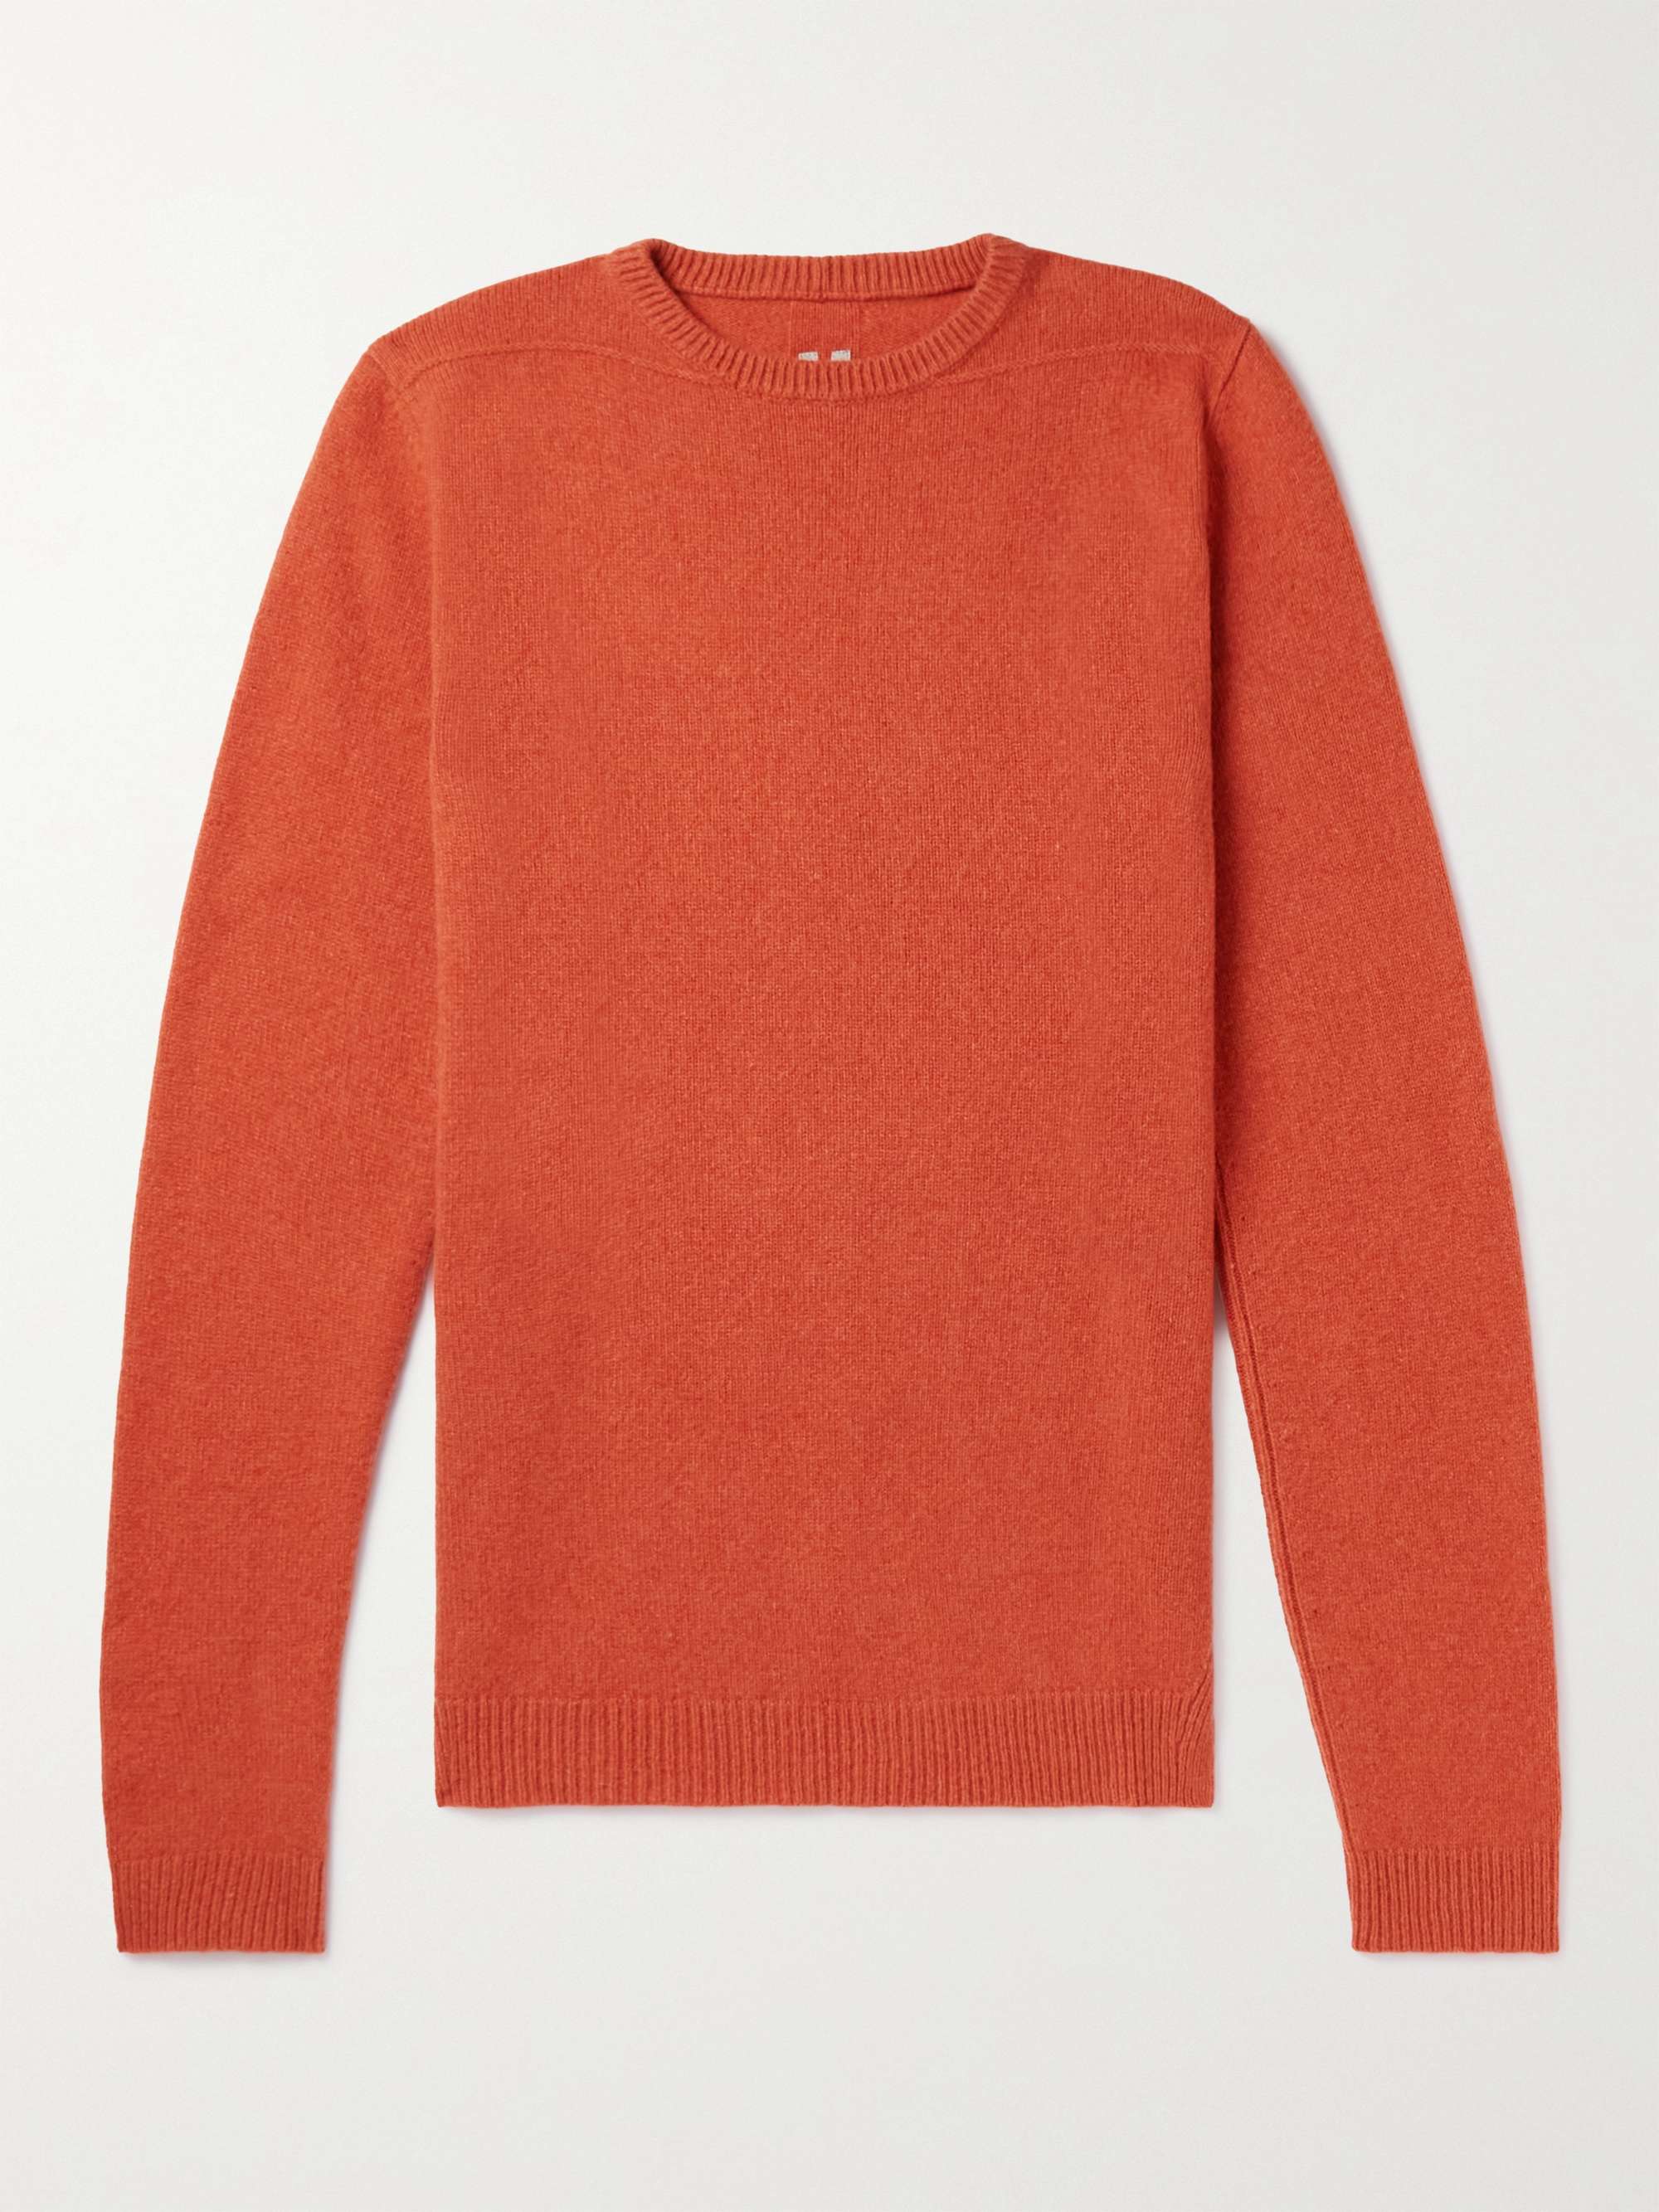 Rick Owens Cashmere Crewneck Knitted Jumper in Orange Womens Clothing Jumpers and knitwear Jumpers 